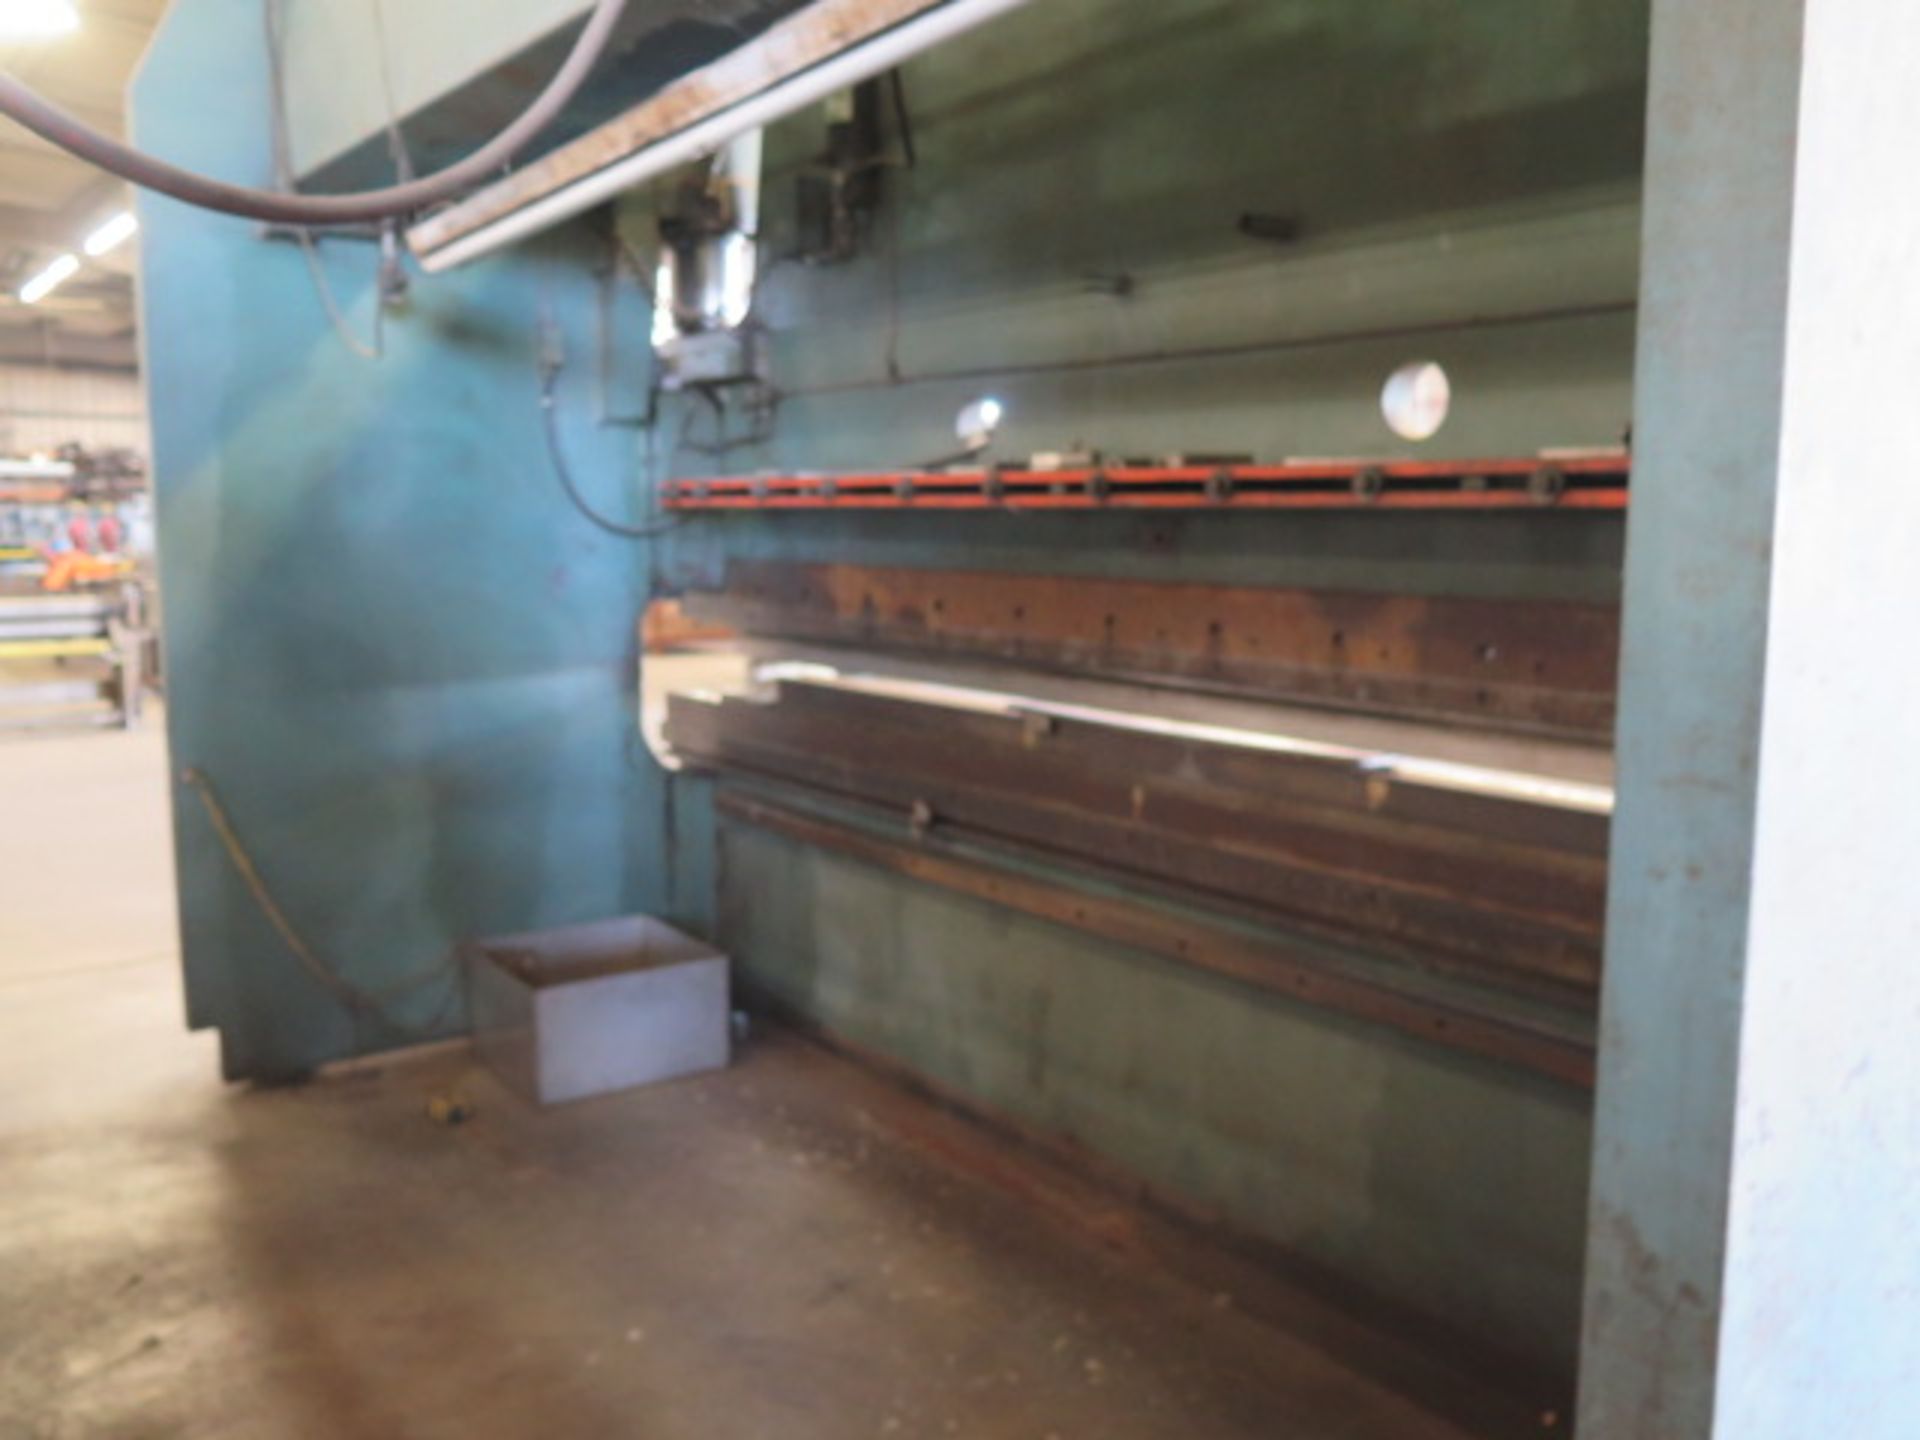 Pacific K300-16 5 1/6” x 14’ Hydraulic Press Brake s/n 6909 w/ 16’ Bed Length, SOLD AS IS - Image 9 of 16